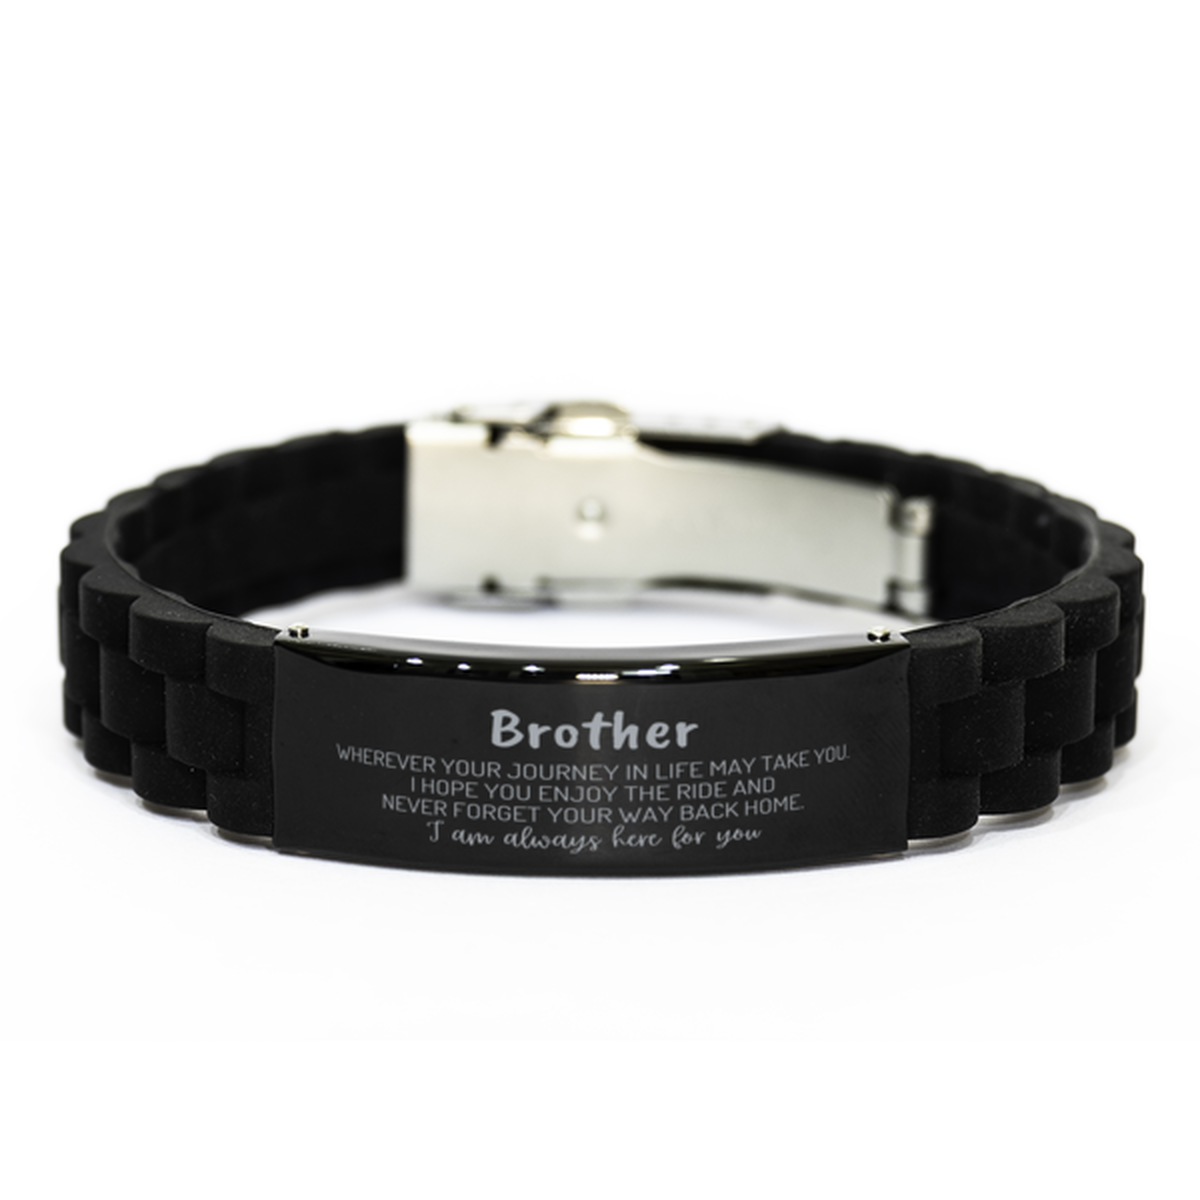 Brother wherever your journey in life may take you, I am always here for you Brother Black Glidelock Clasp Bracelet, Awesome Christmas Gifts For Brother, Brother Birthday Gifts for Men Women Family Loved One